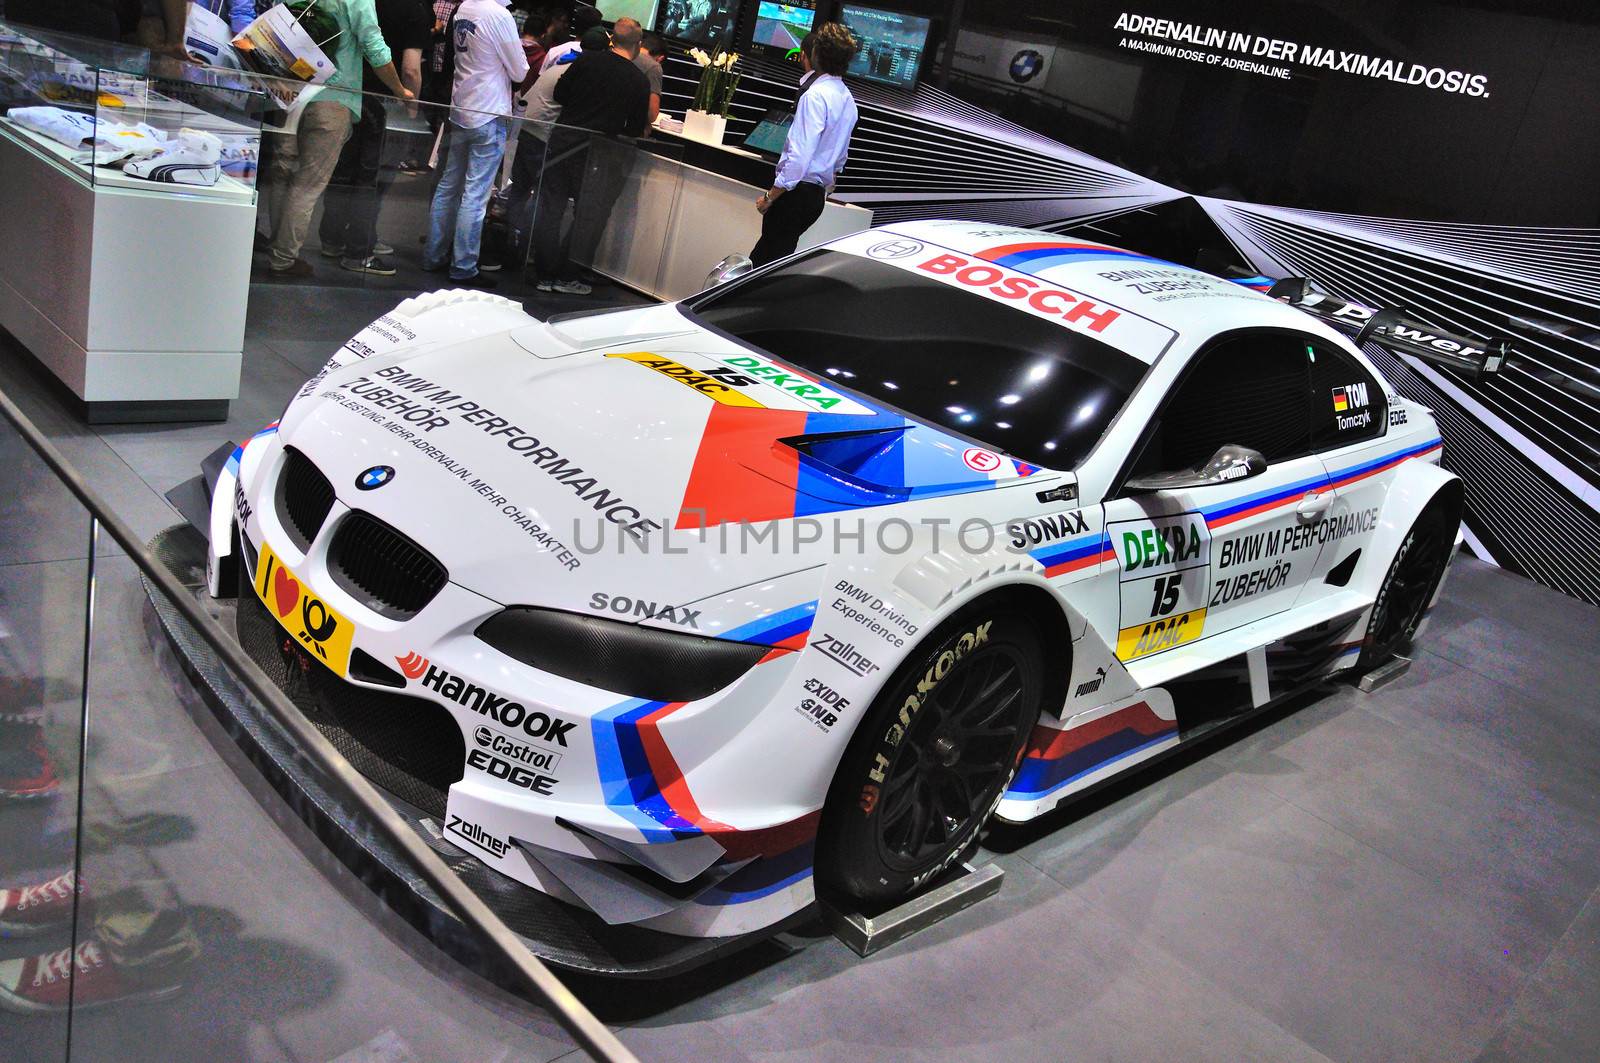 FRANKFURT - SEPT 14: BMW M3 E92 racing edition GT2 presented as world premiere at the 65th IAA (Internationale Automobil Ausstellung) on September 14, 2013 in Frankfurt, Germany